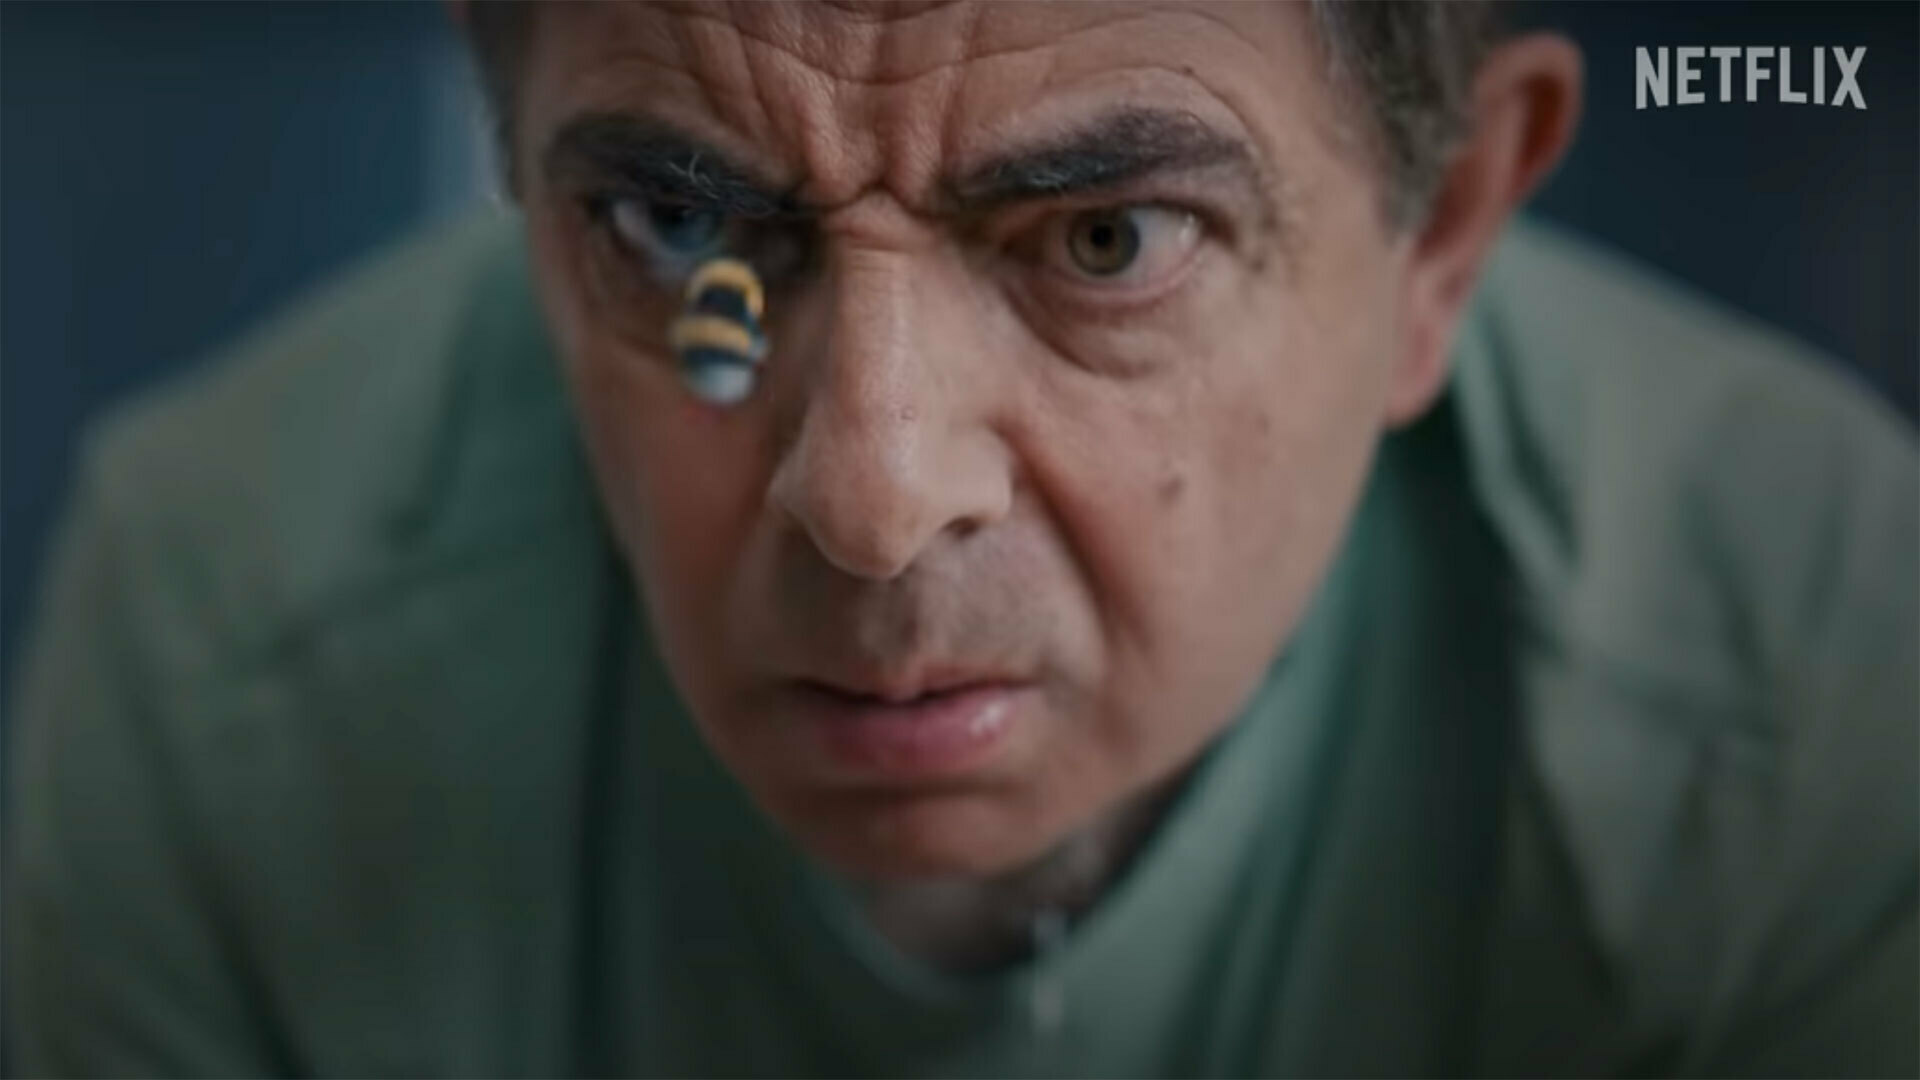 Netflix's very silly 'Man vs Bee' trailer sees Rowan Atkinson.well, you can guess